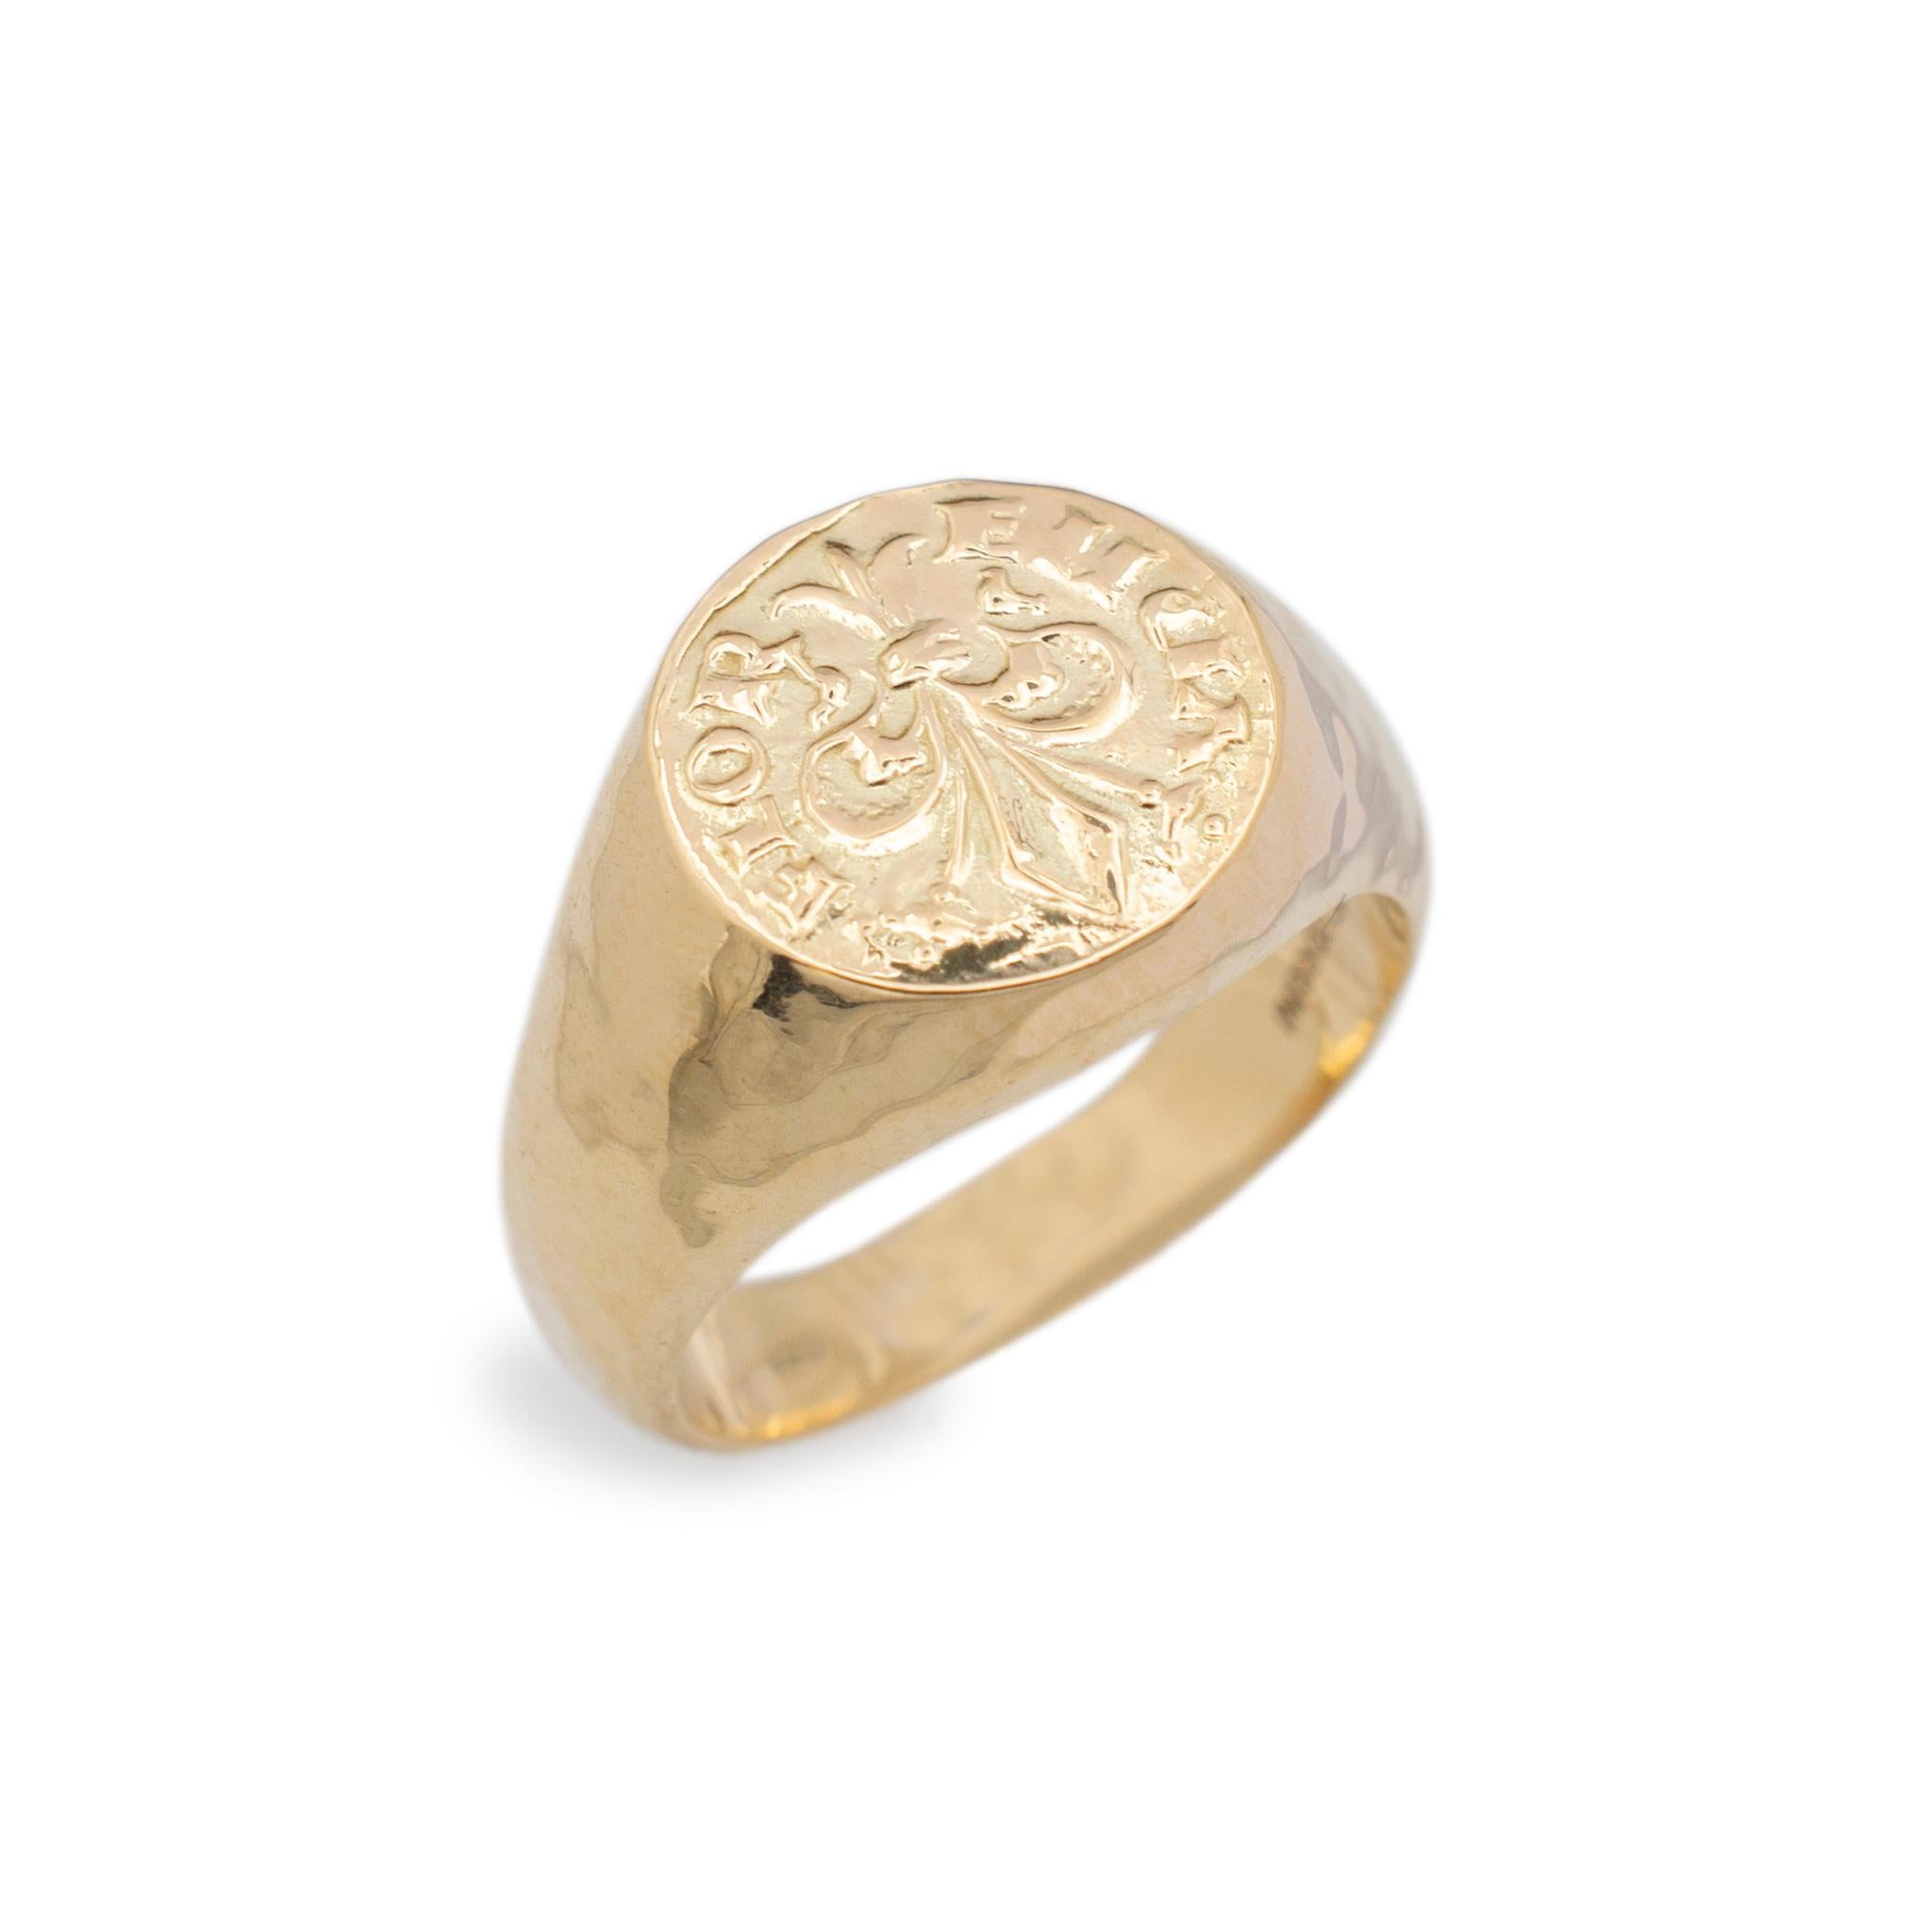 Brand: Torrini

Gender: Unisex

Metal Type: 14K Yellow Gold

Size: 7

Shank Maximum Width: 12.40 mm tapering to 3.45 mm

Weight: 6.91 grams

Unisex 14K yellow gold vintage signet cocktail ring with a tapered comfort-fit shank. The metal was tested